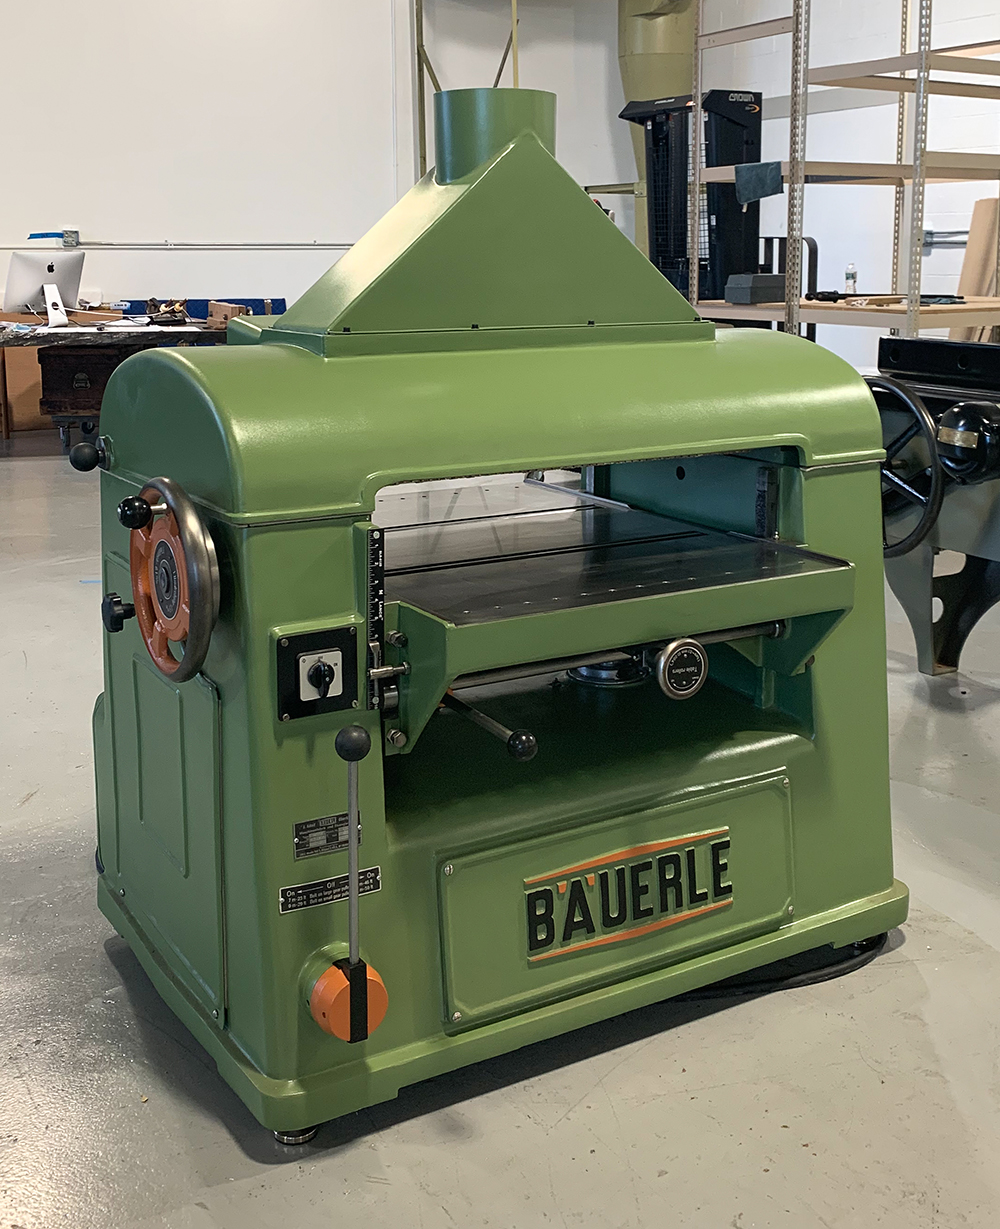 Bauerle Planer Front Angle